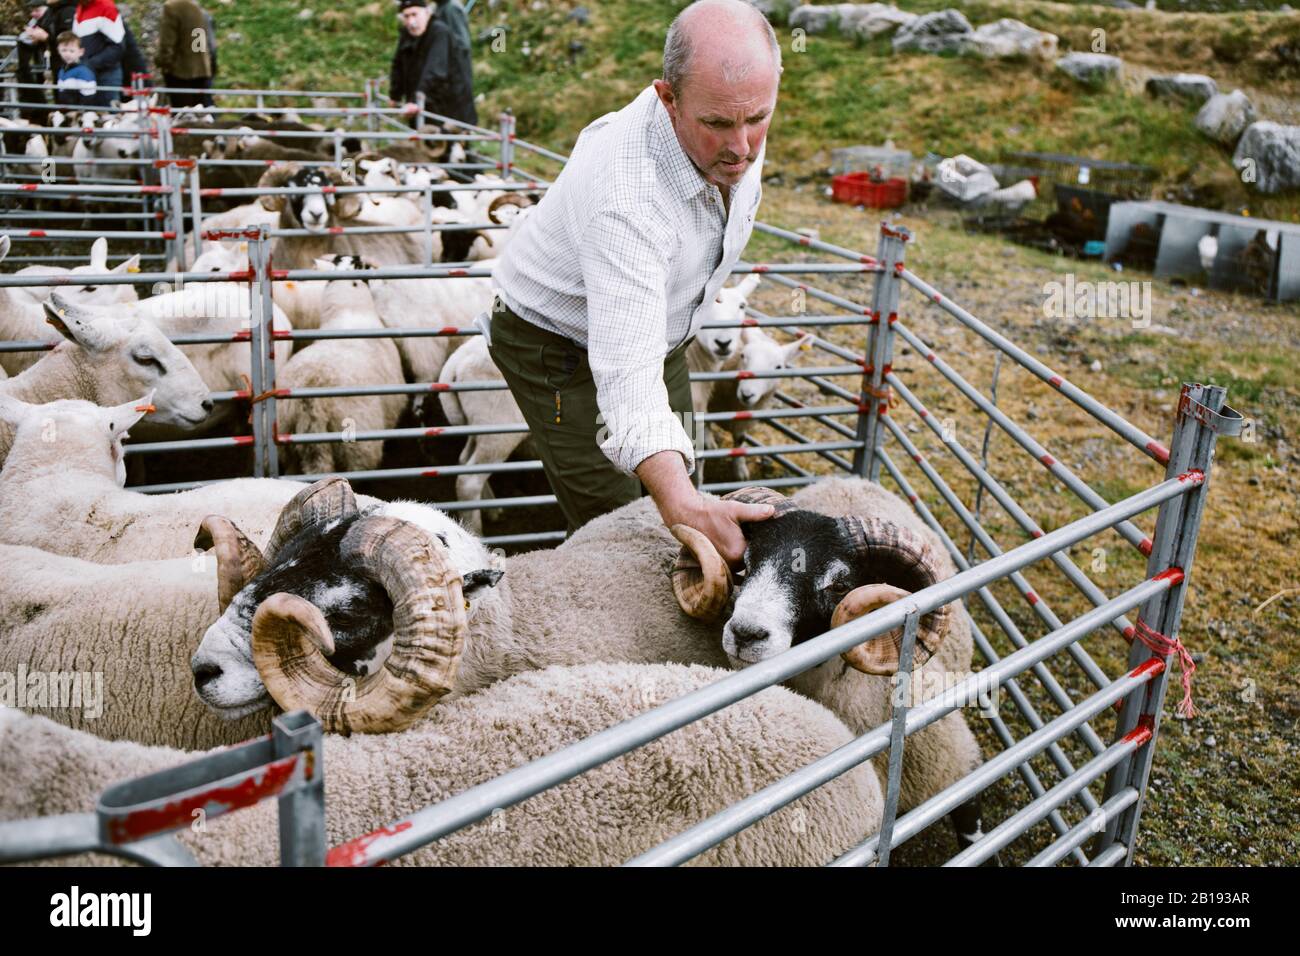 Sheep handler farmer grabbing sheep by horns in pen at North Harris Agricultural Show 2019, Tarbert, Isle of Harris, Outer Hebrides, Scotland Stock Photo